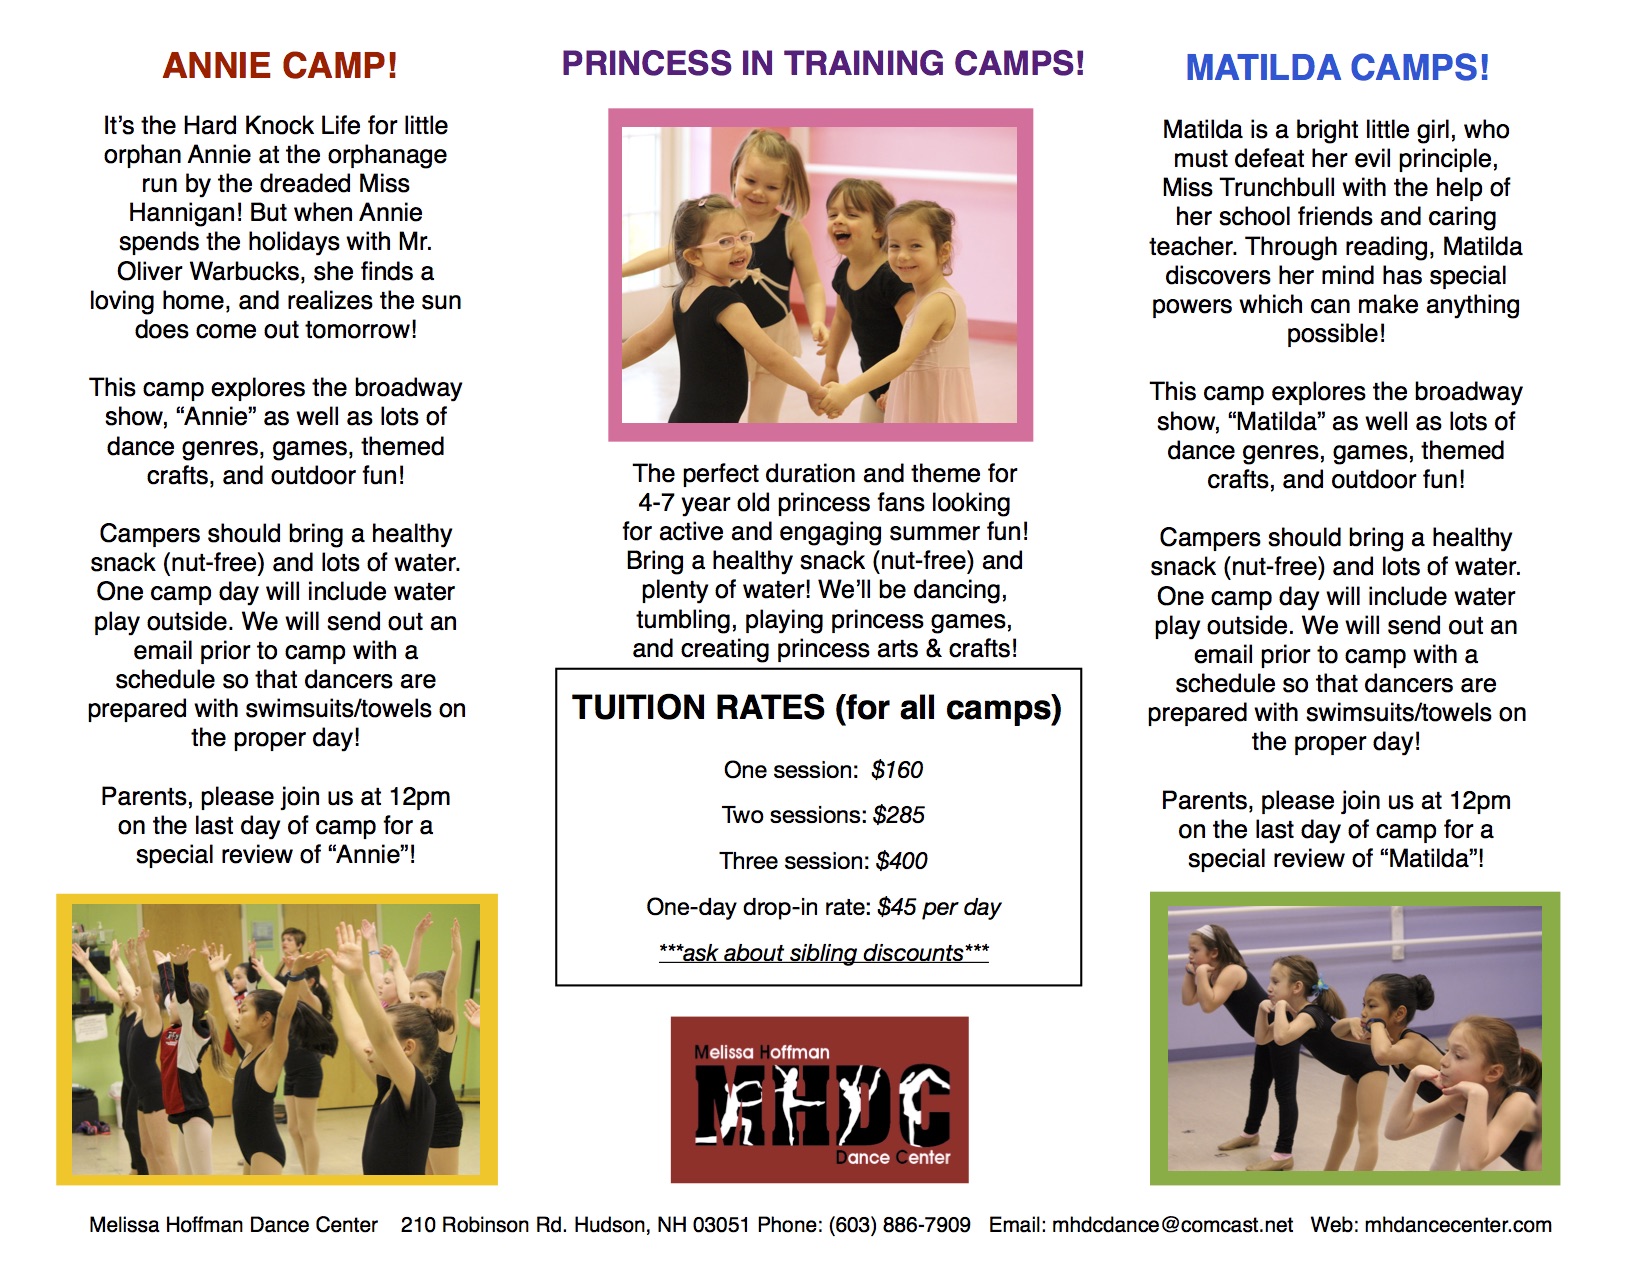 MHDC-Summer-2016-Camps-Bruchure_page24-10-16